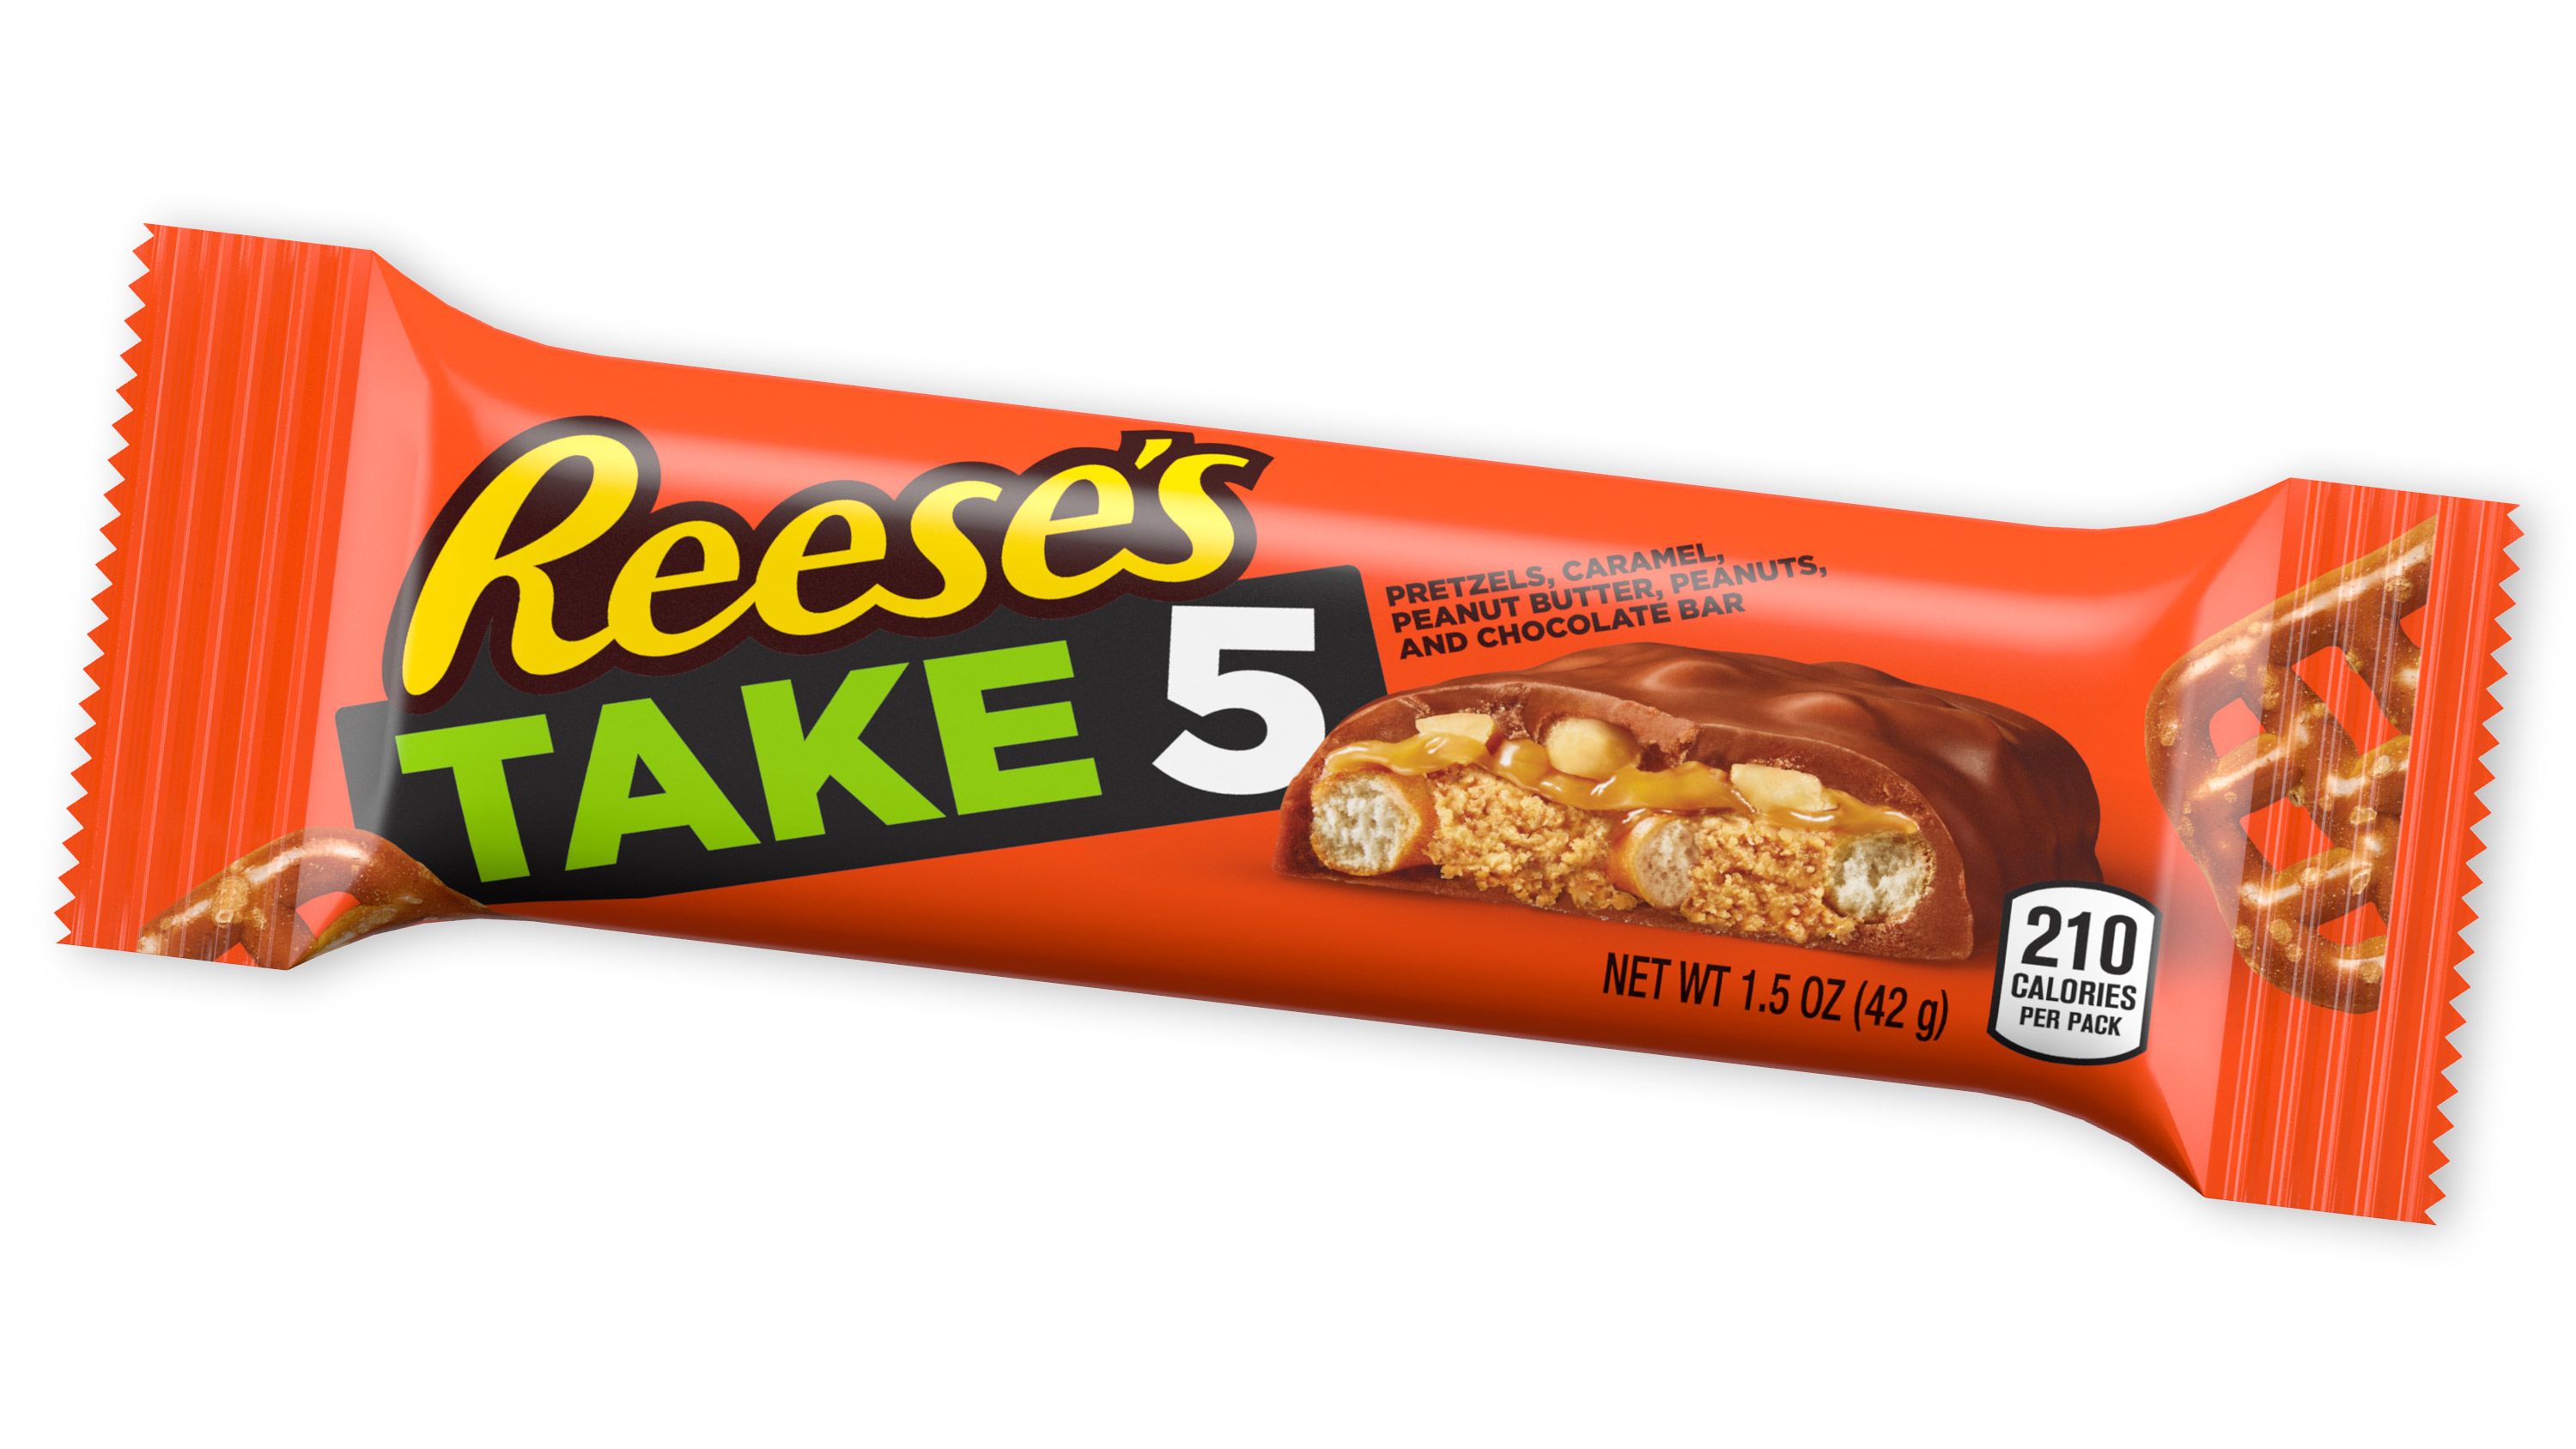 Reese's Introduces An Unexpected Caramel Big Cup To Candy Aisles